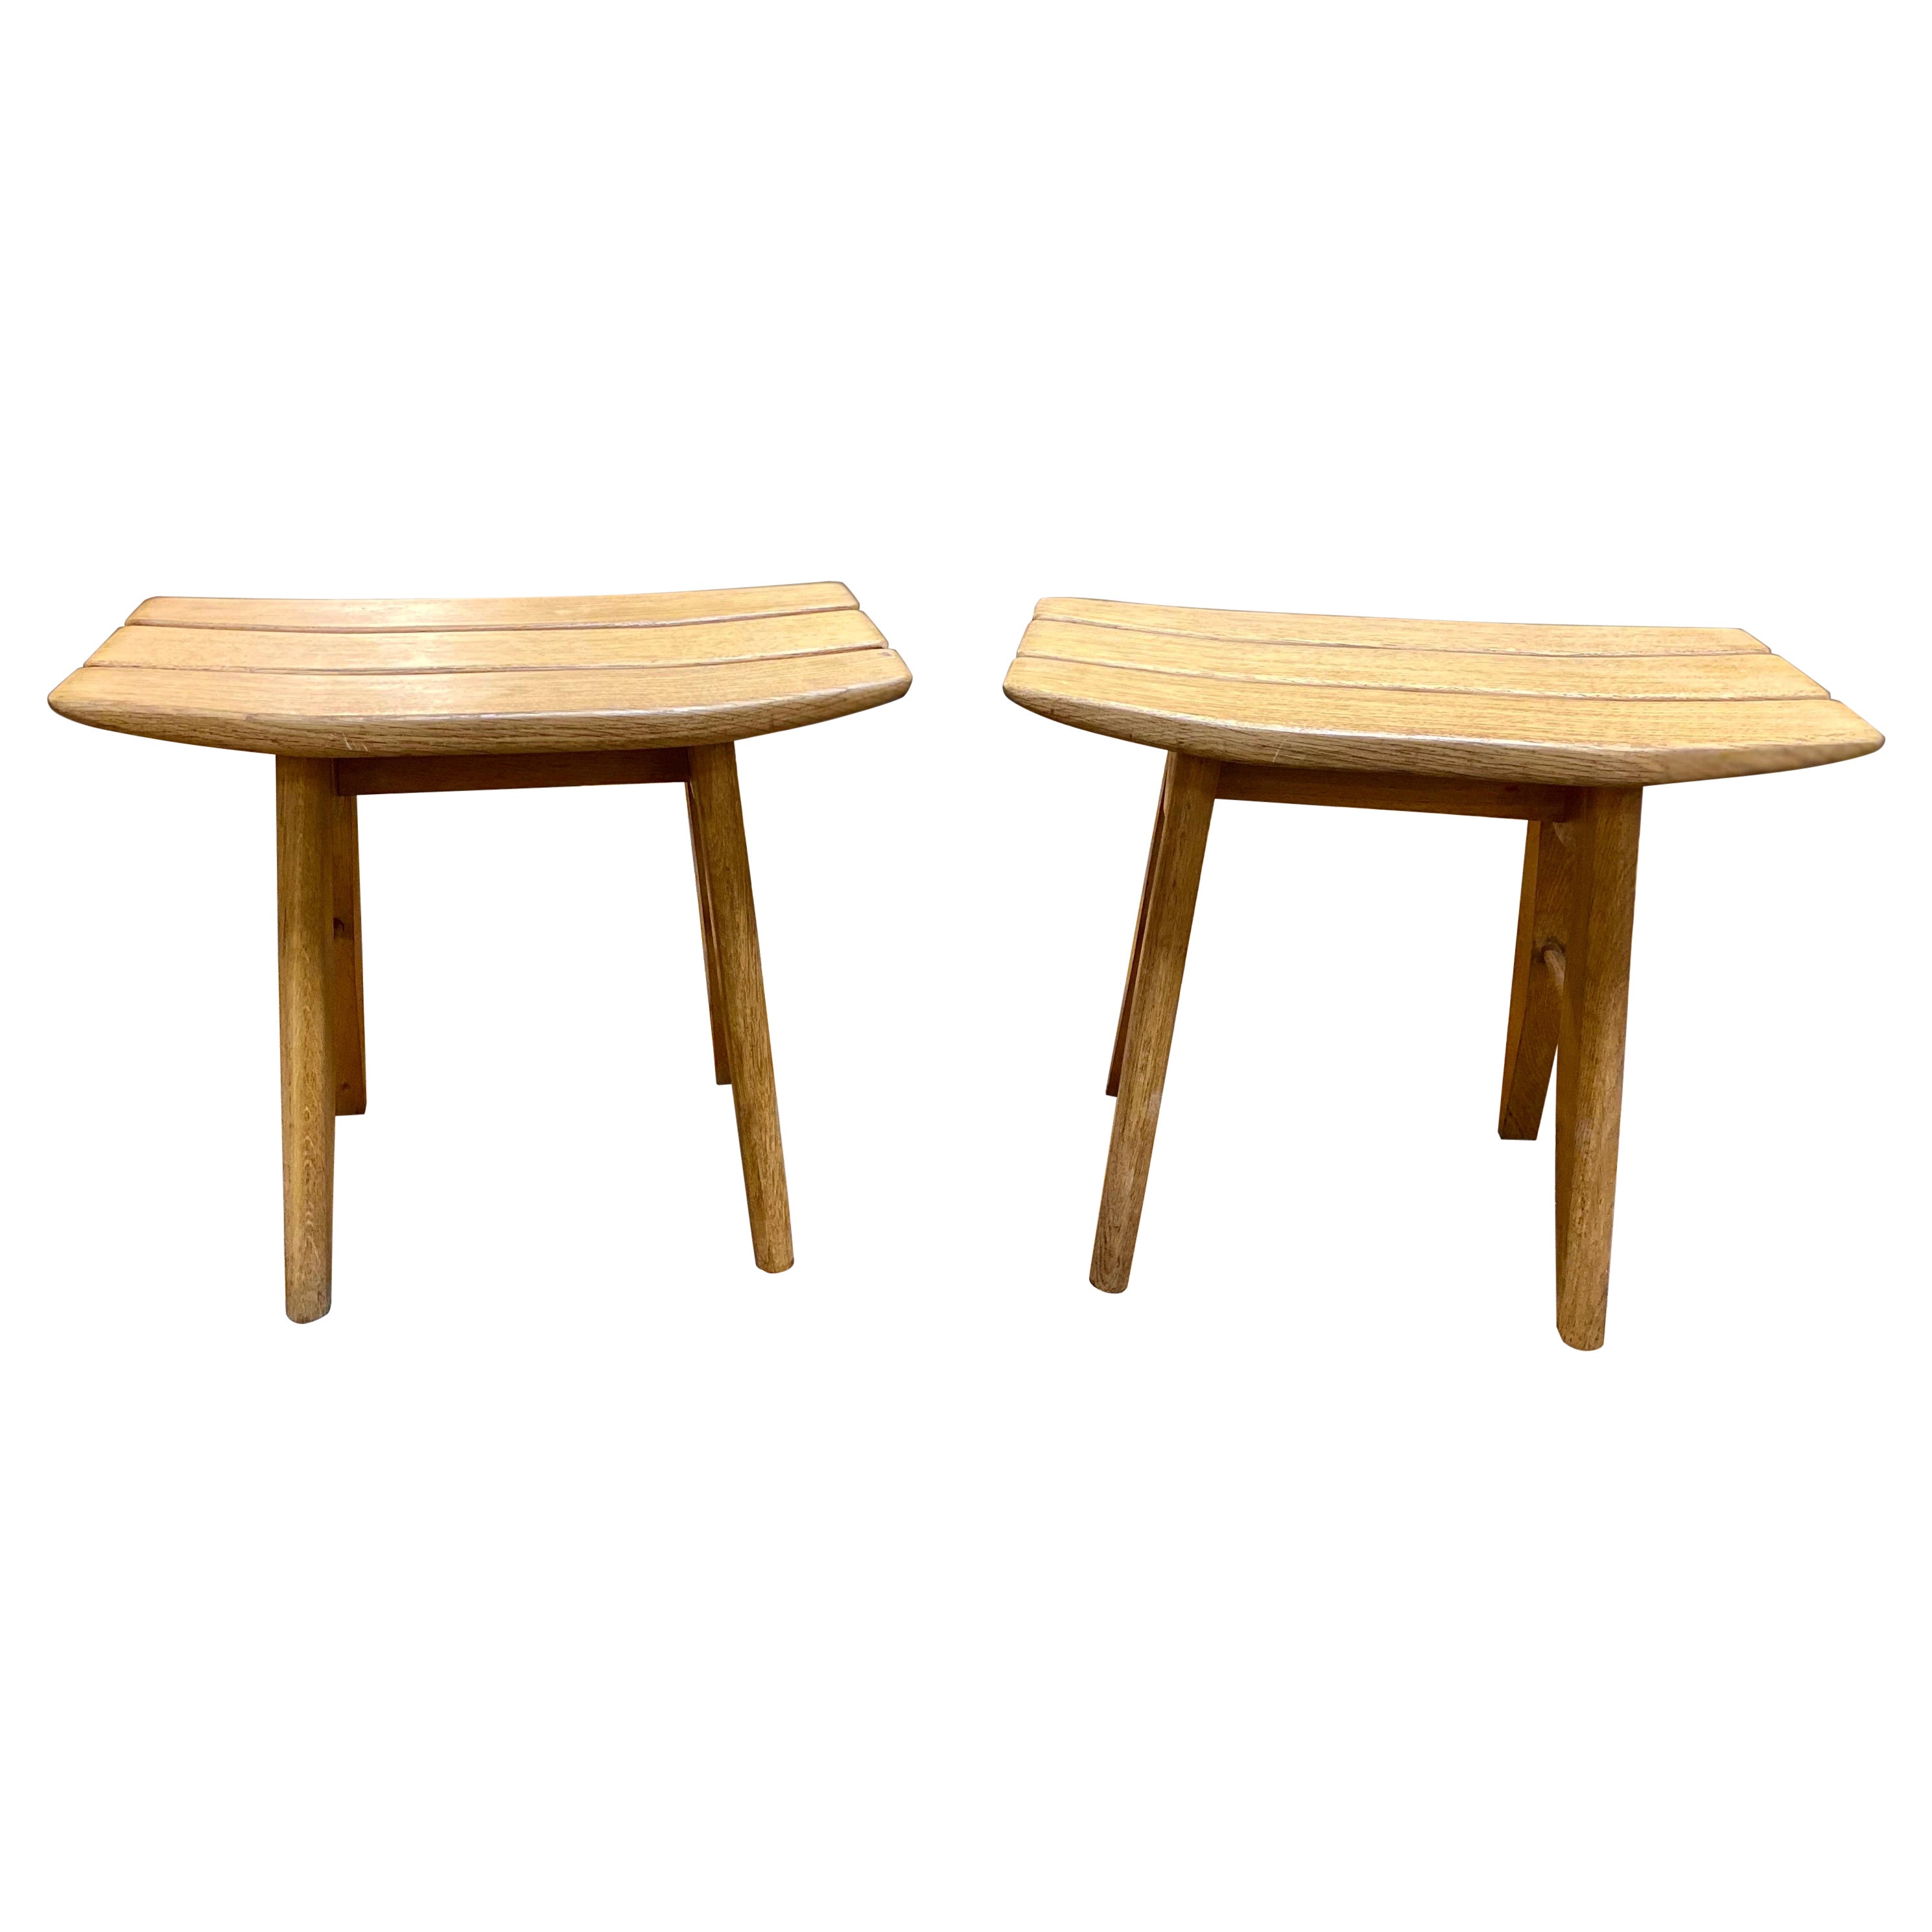 Pair of Guillerme et Chambron "Thierry" Stools, Circa 1950s For Sale